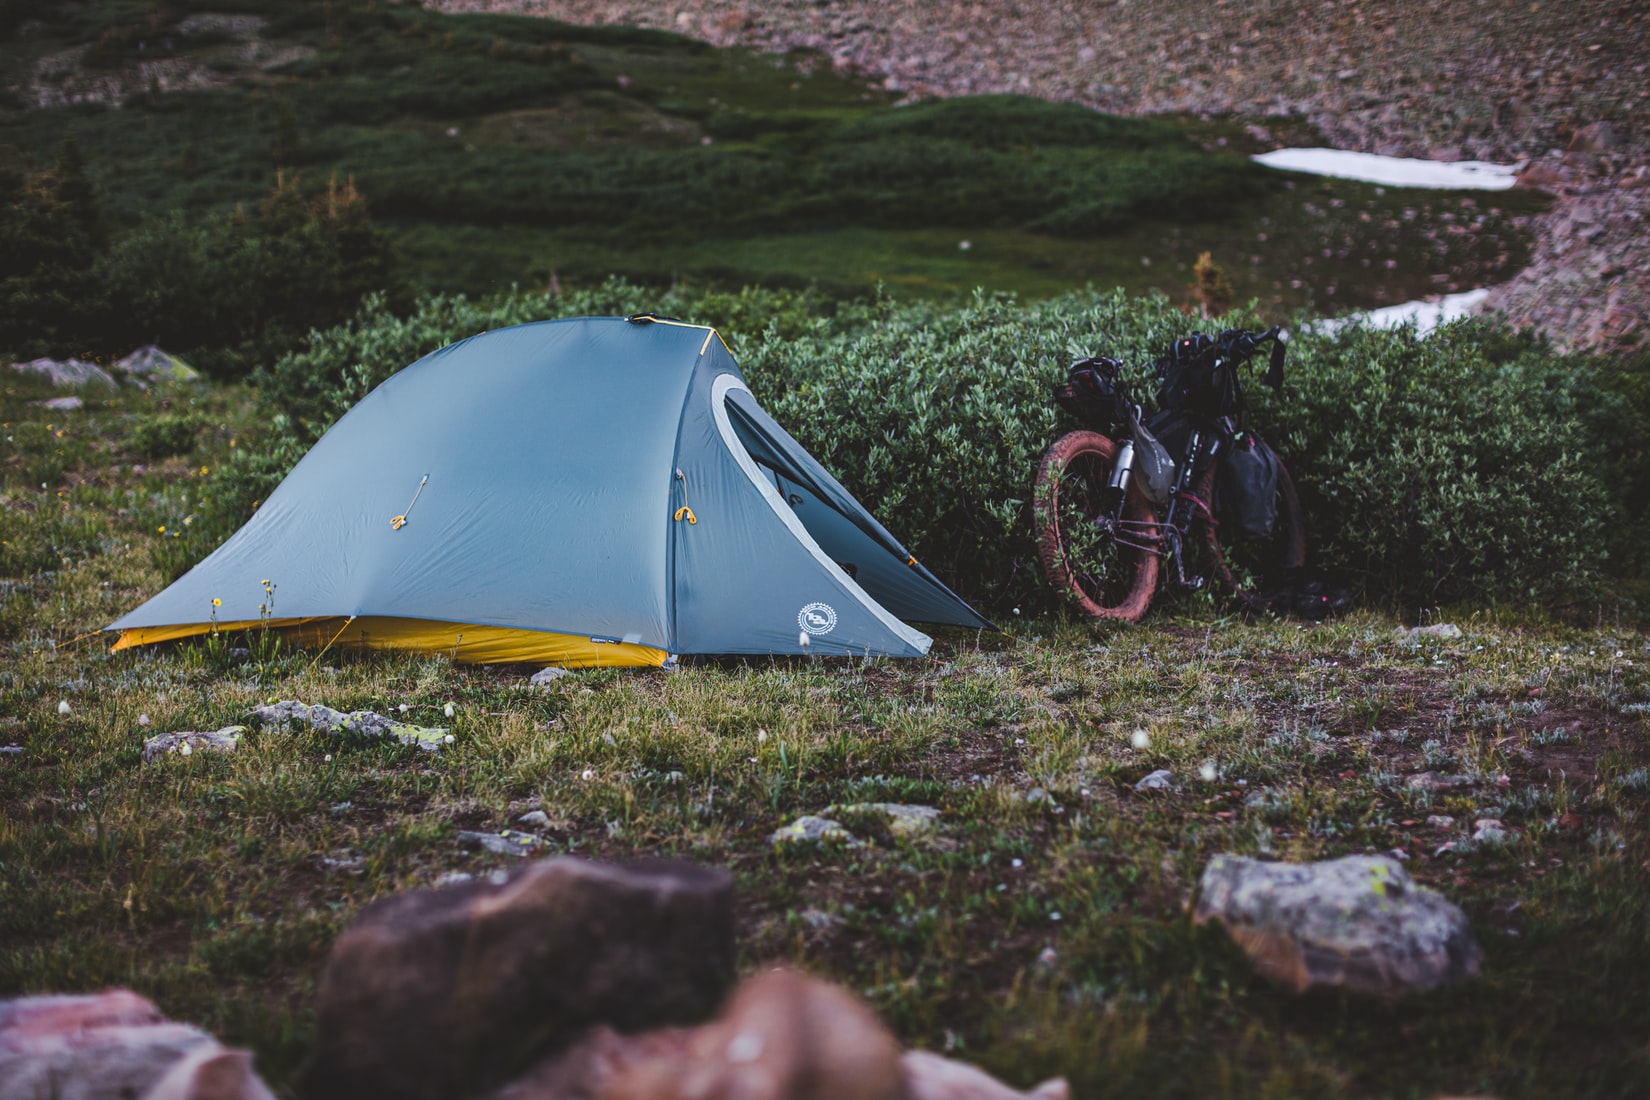 Bikepacker and tent set up in a field